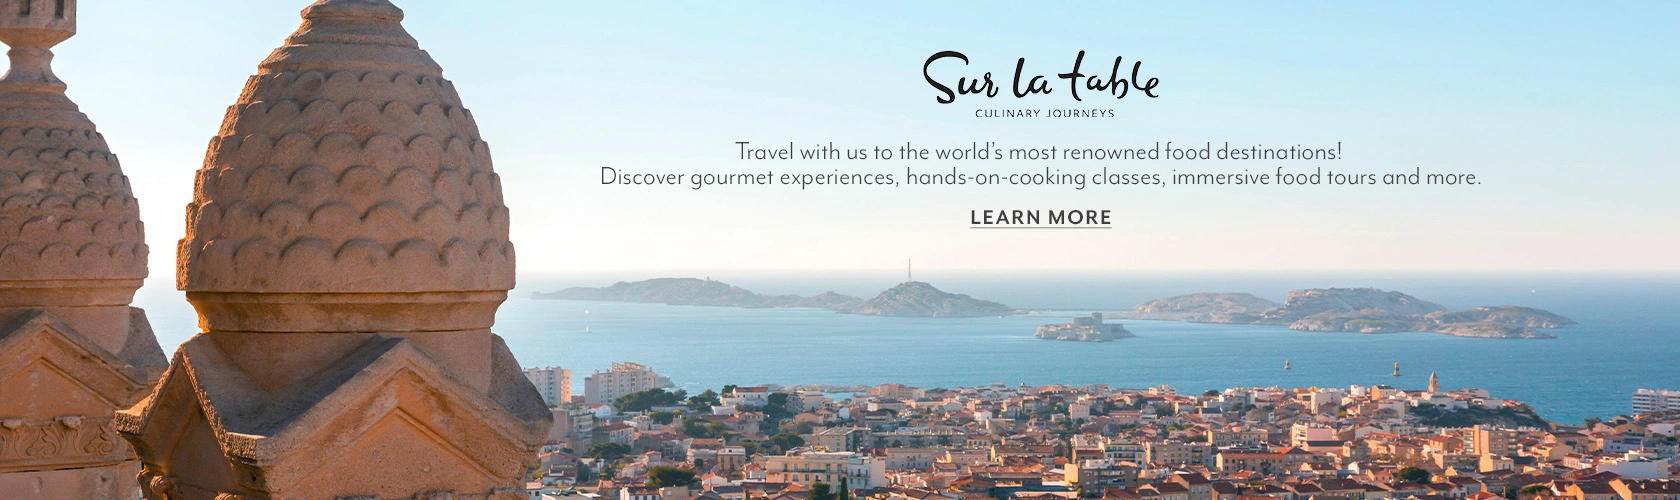 Sur La Table Culinary Journeys. Travel with us to the world's most renowned food destinations! Discover gourmet experiences, hands-on cooking classes immersive food tours and more. Learn More.